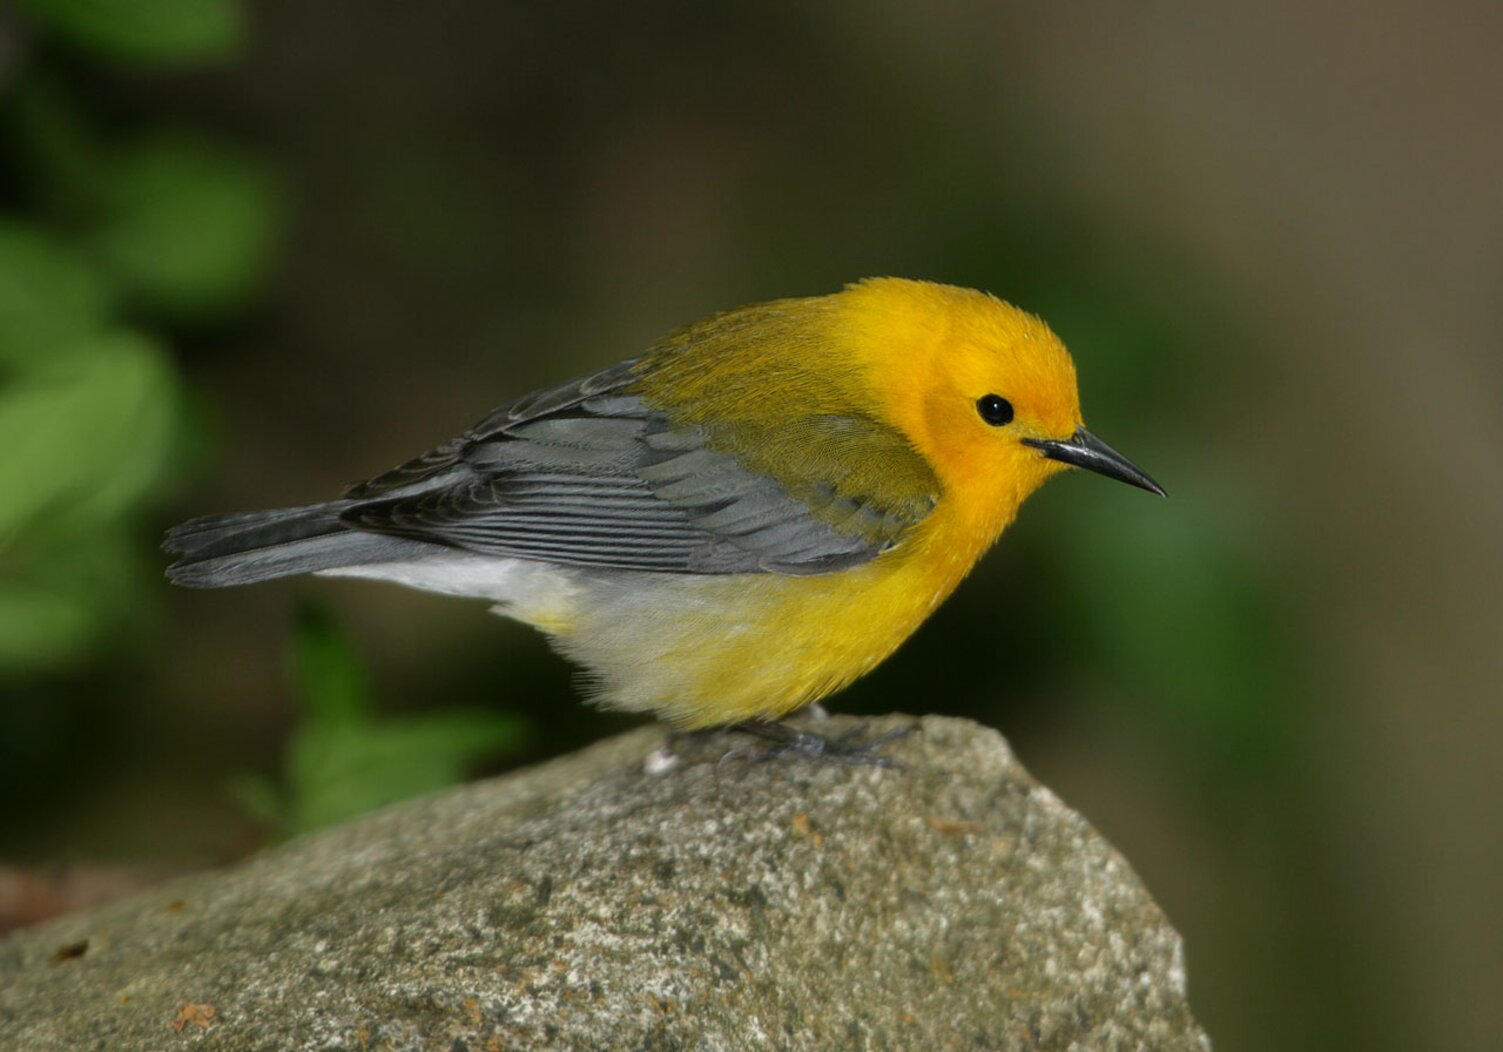 Prothonotary Warblers are among the species that “overshoot” in the spring, coming a bit too far north before returning further south to breed. Photo: Steve Nanz